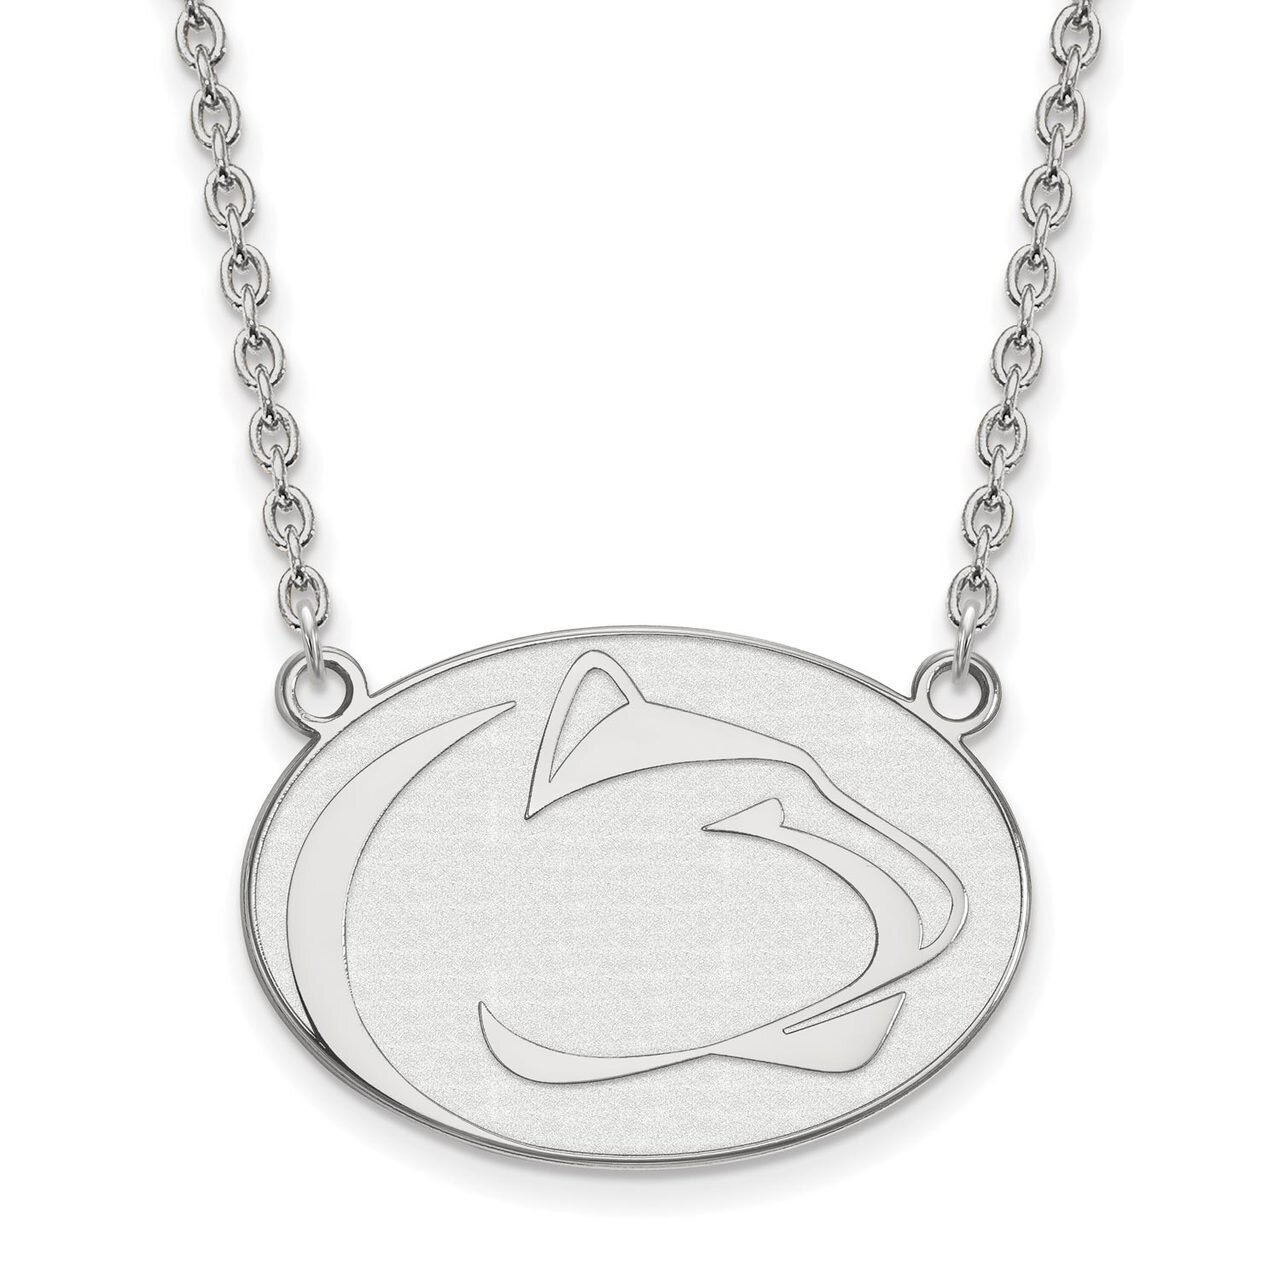 Penn State University Large Pendant with Chain Necklace 14k White Gold 4W020PSU-18